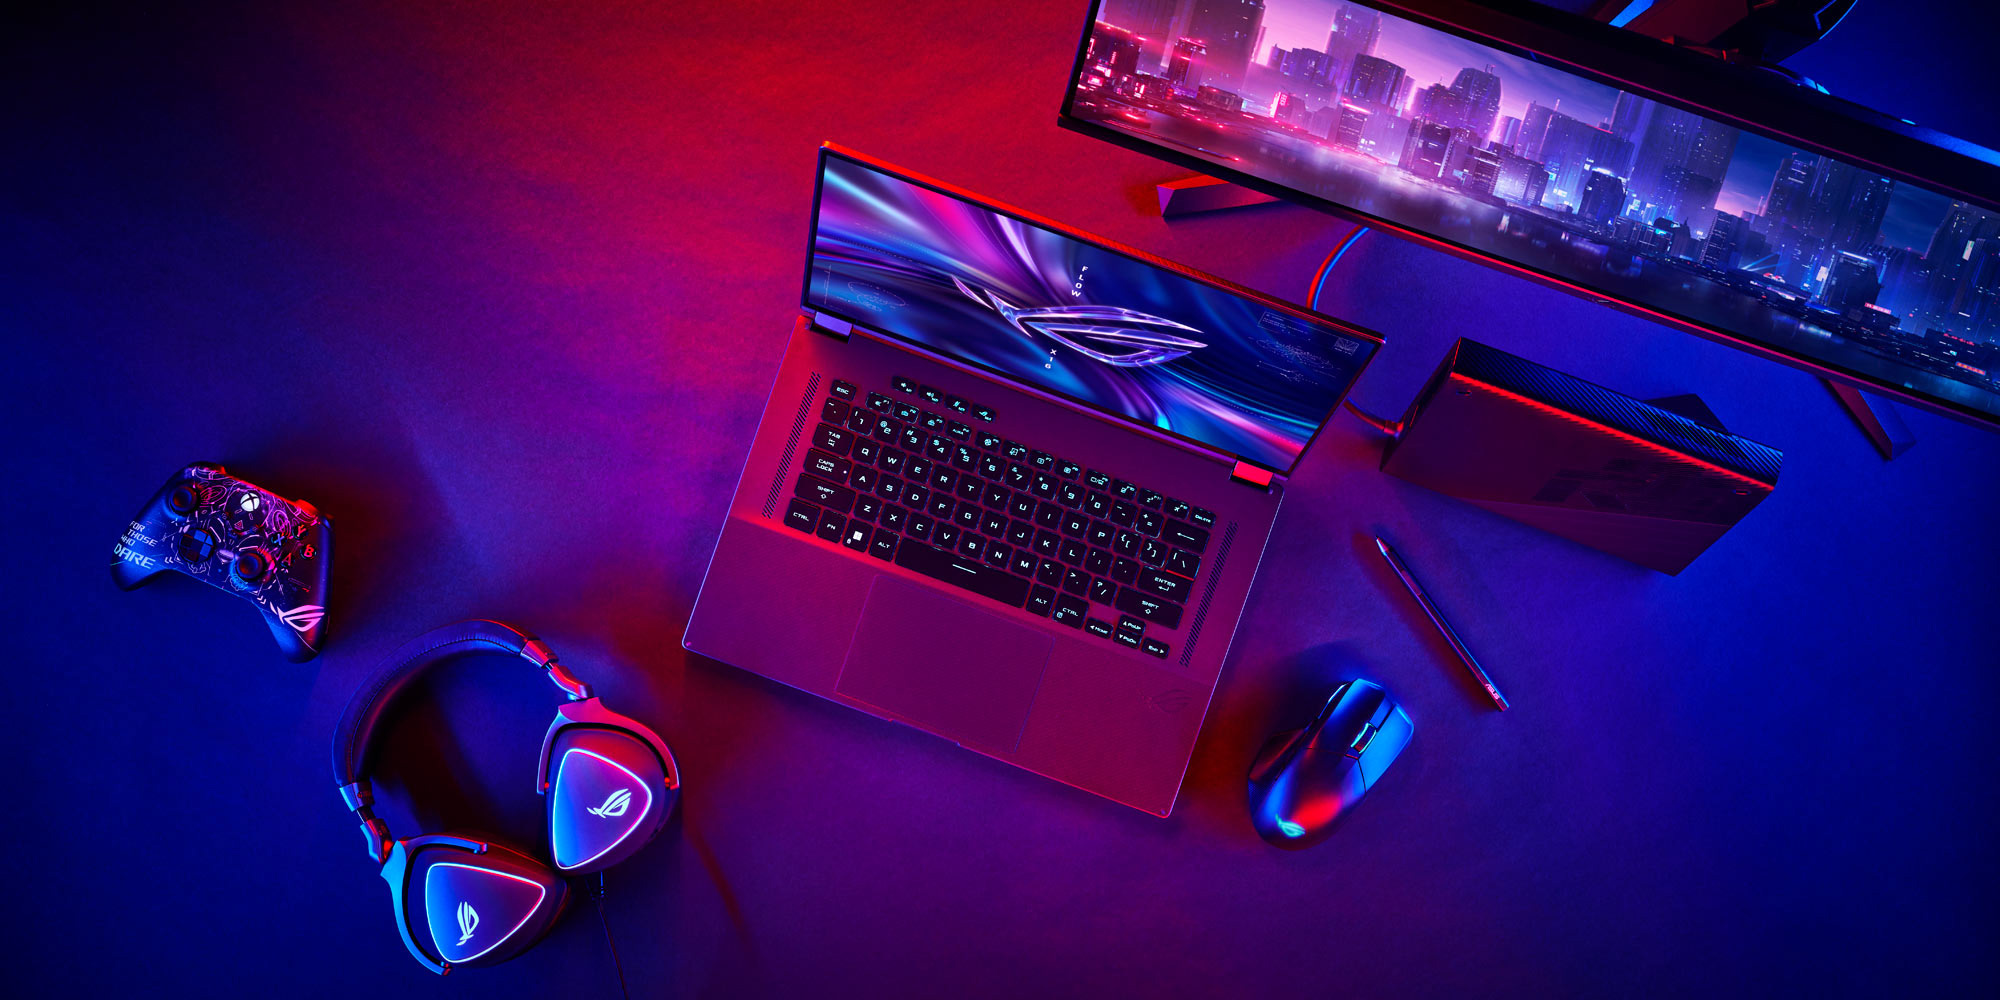 ASUS ROG Flow X16 mini LED gaming laptop is here - 9to5Toys